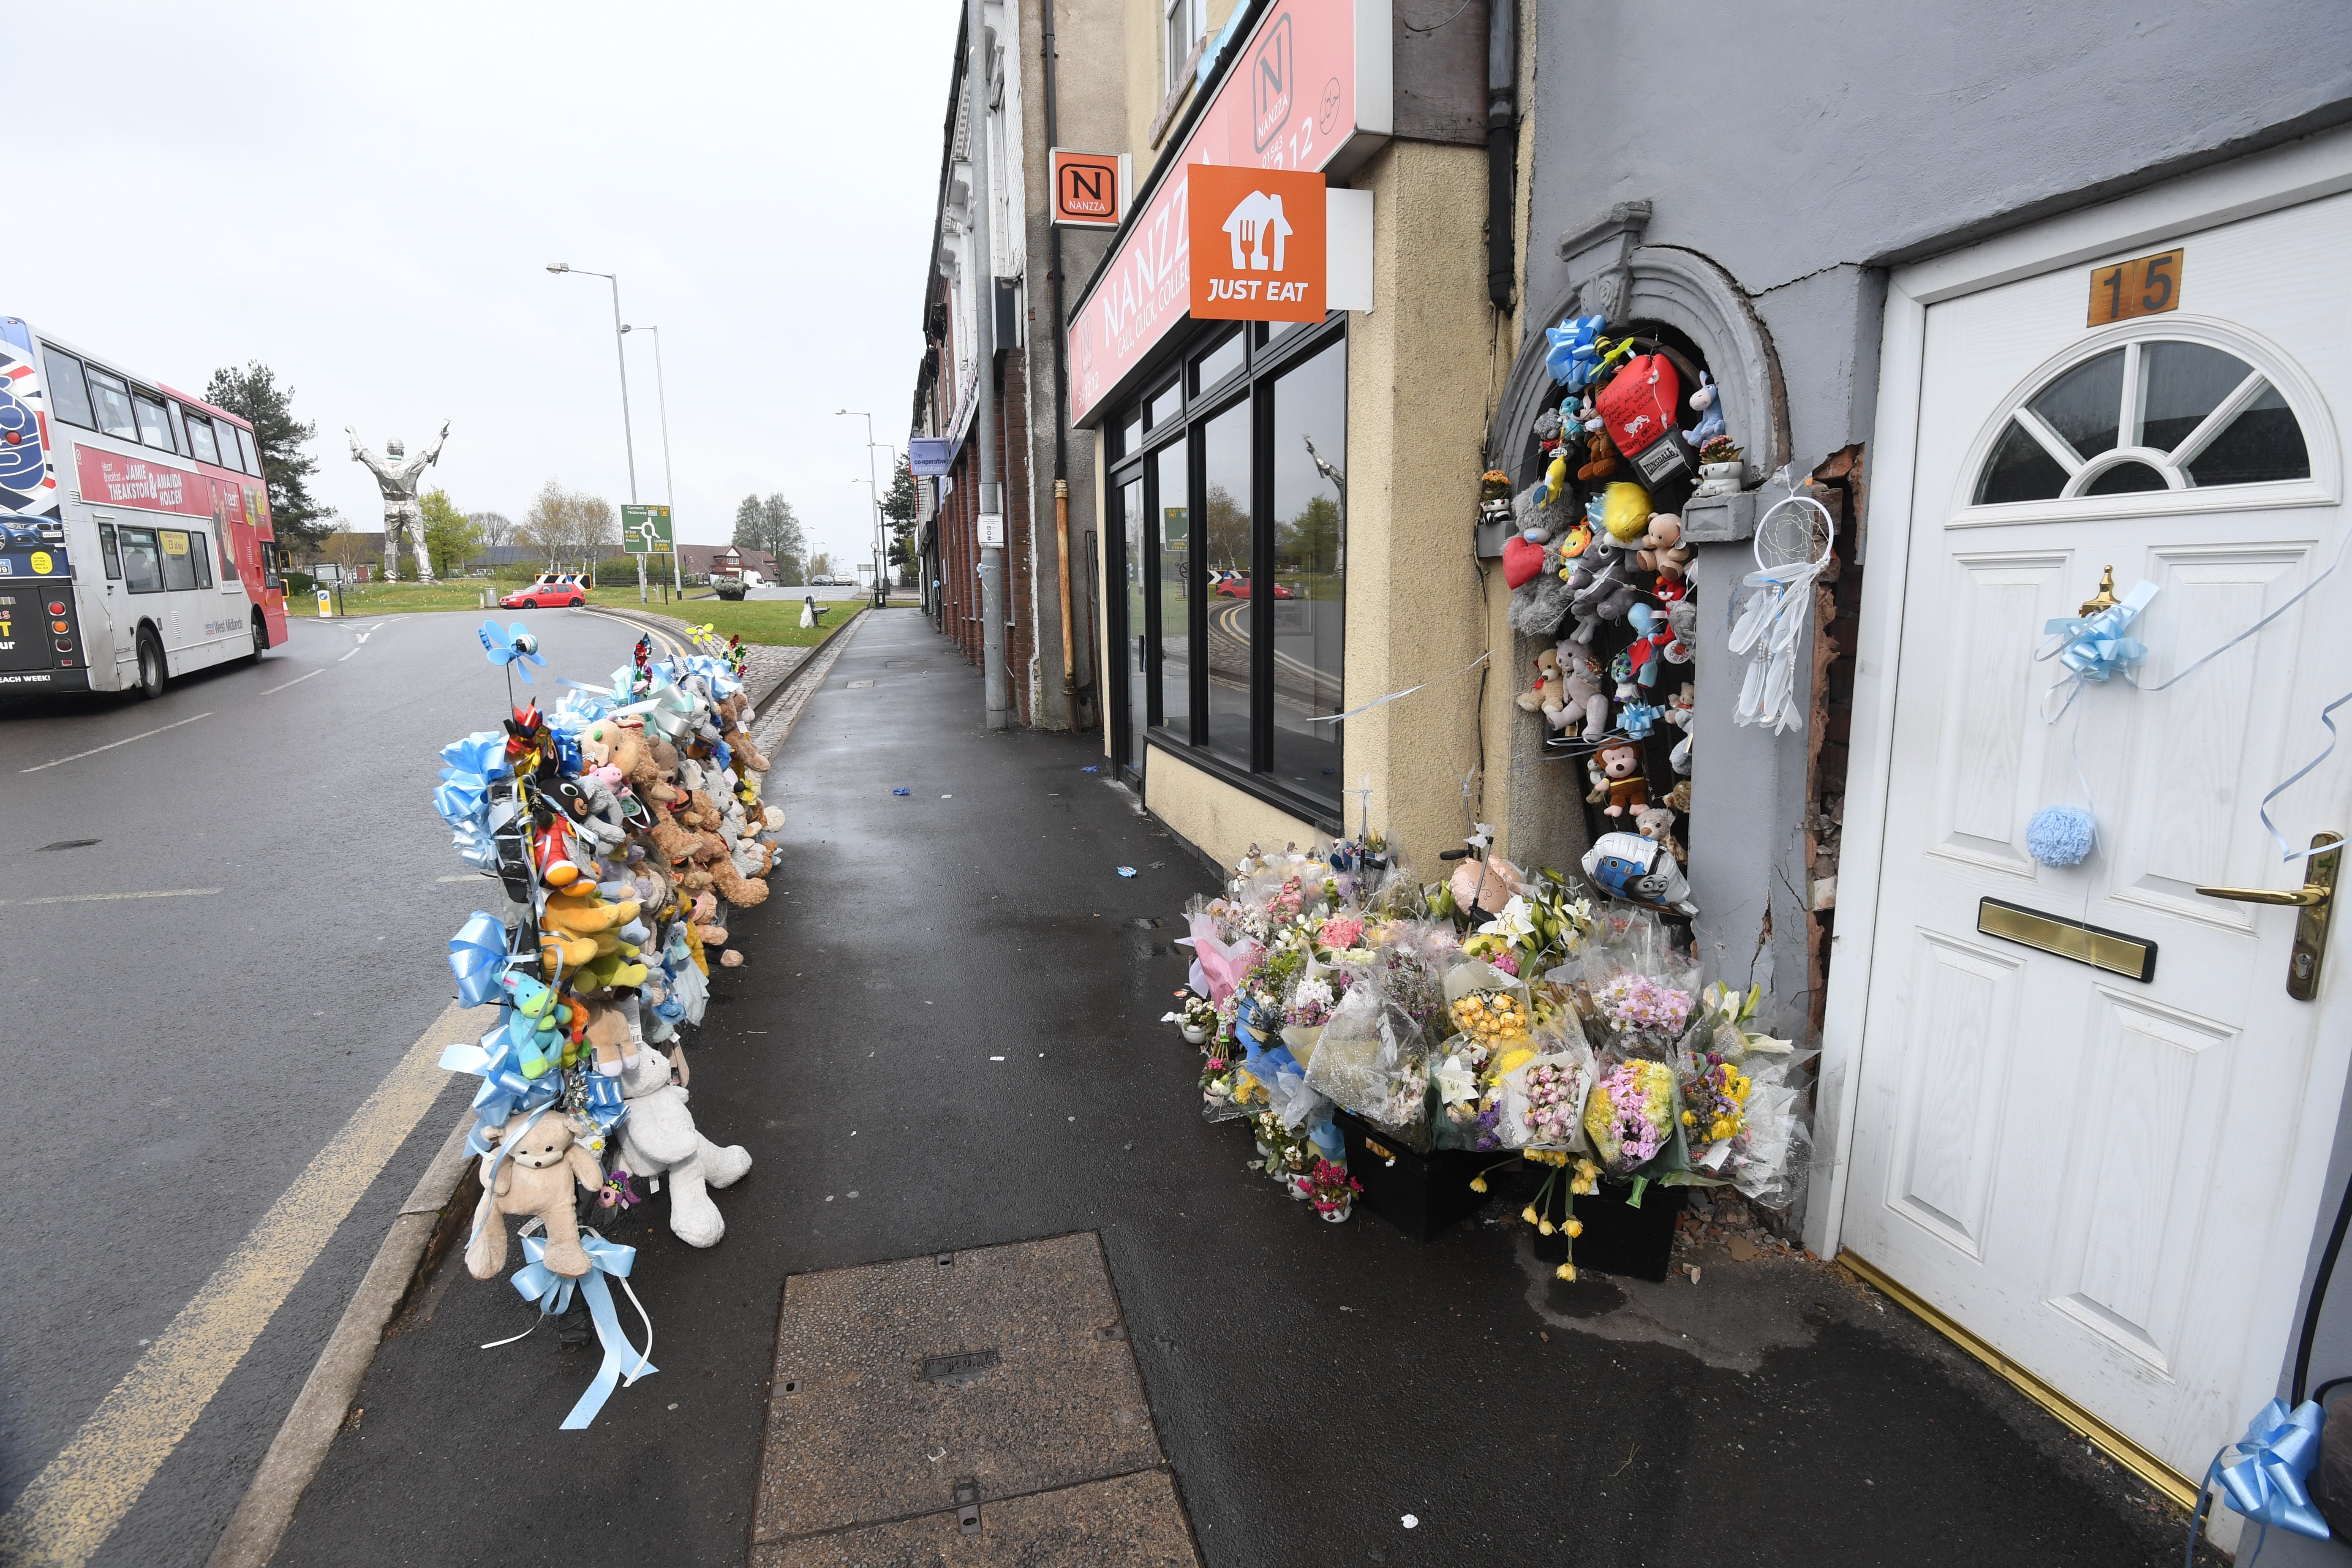 Flowers and soft toys were left at the scene